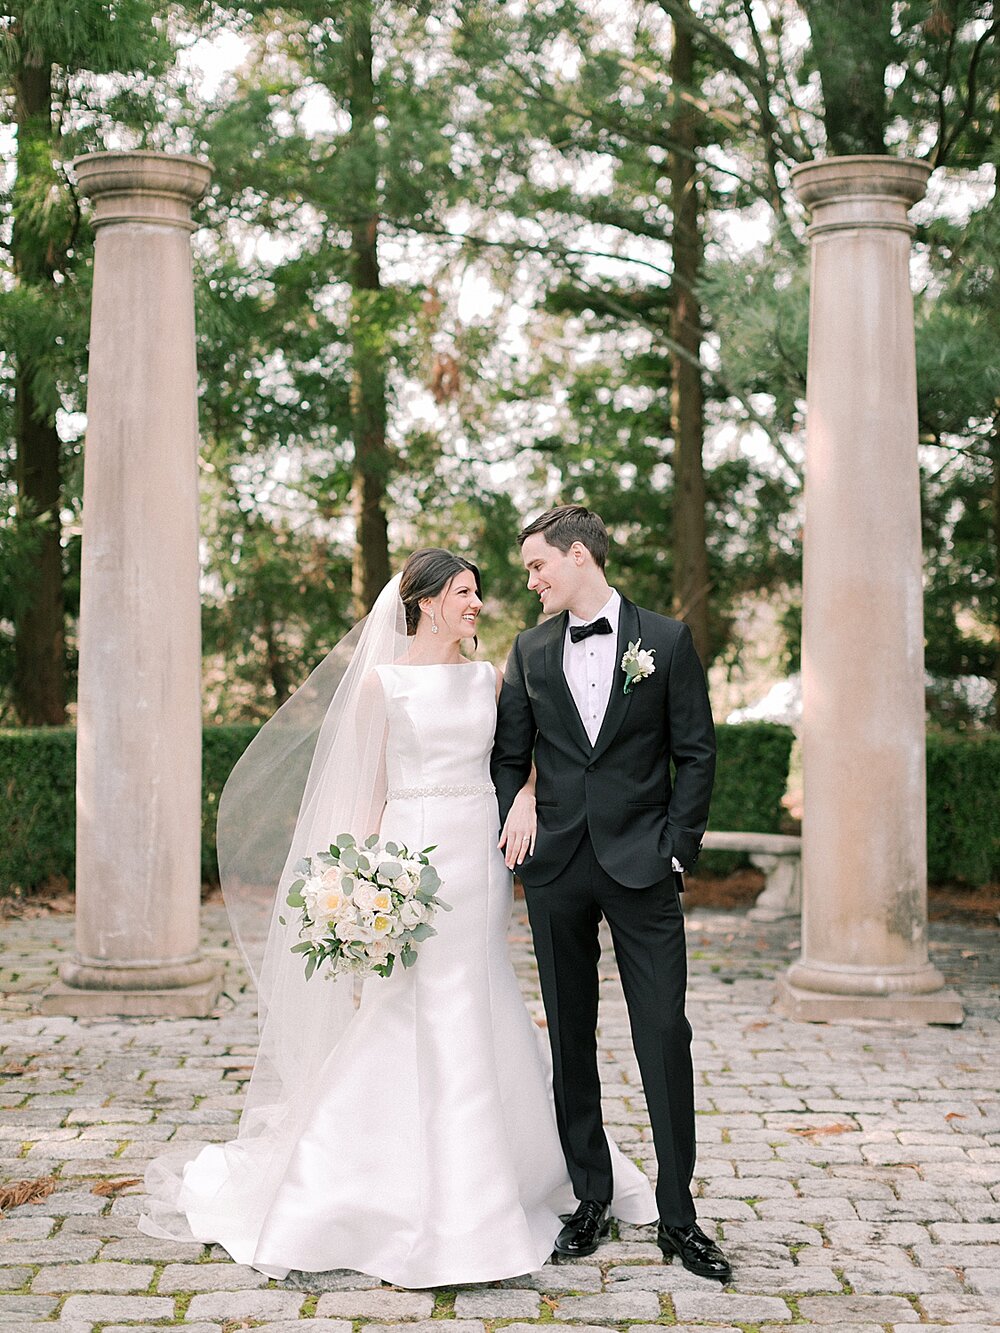 bride and groom pose in gardens of Ashford Estate | Tri-State area wedding venues photographed by Asher Gardner Photography